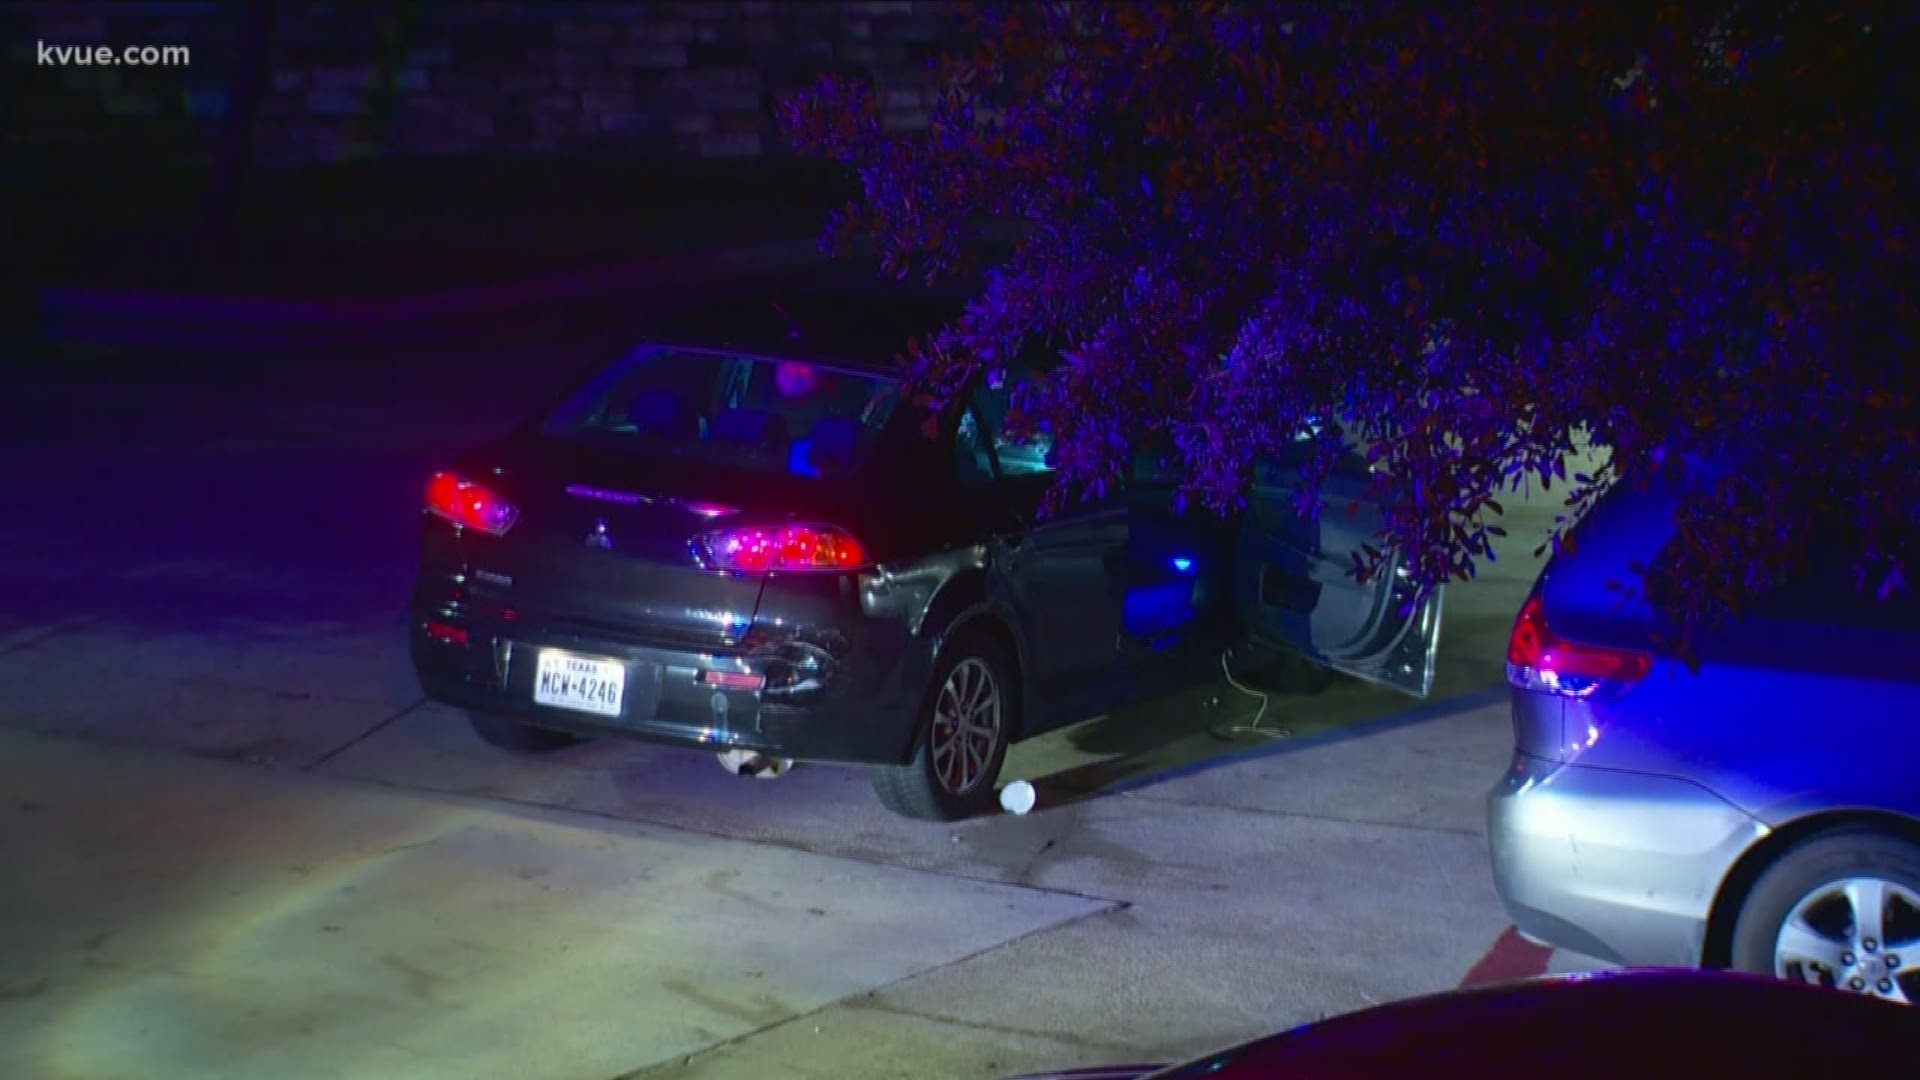 A car covered in bullet holes was found at the scene at the apartment complex.